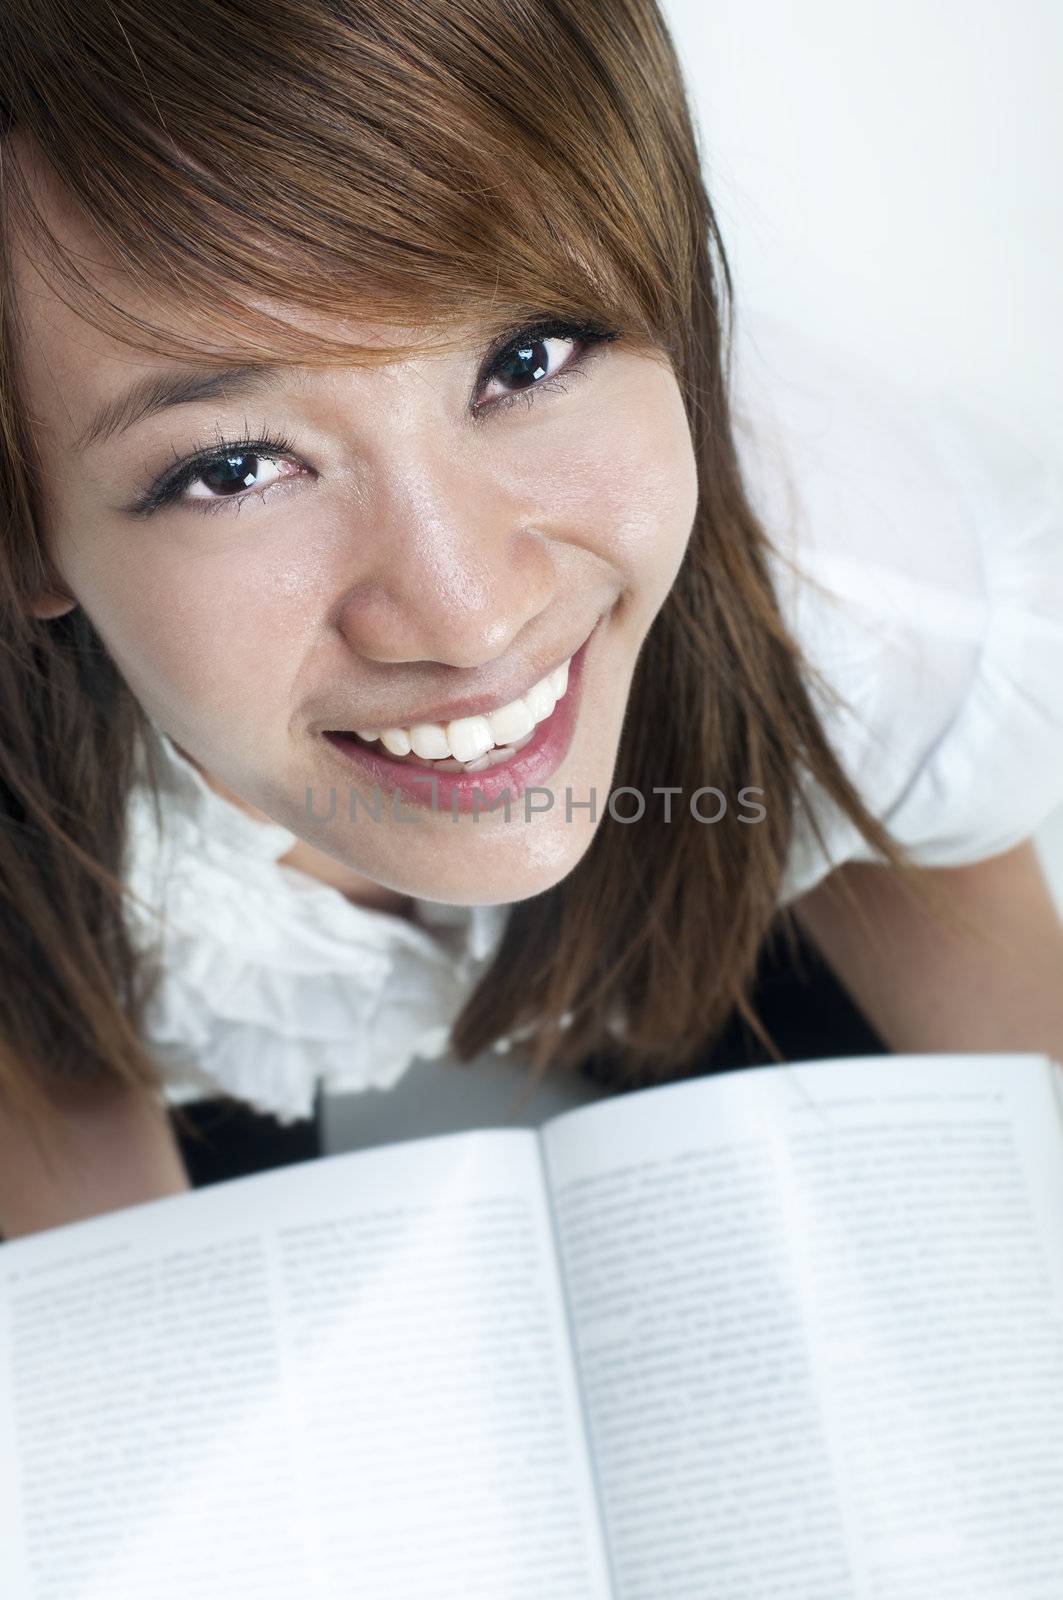 Young college student is studying, face looking up.